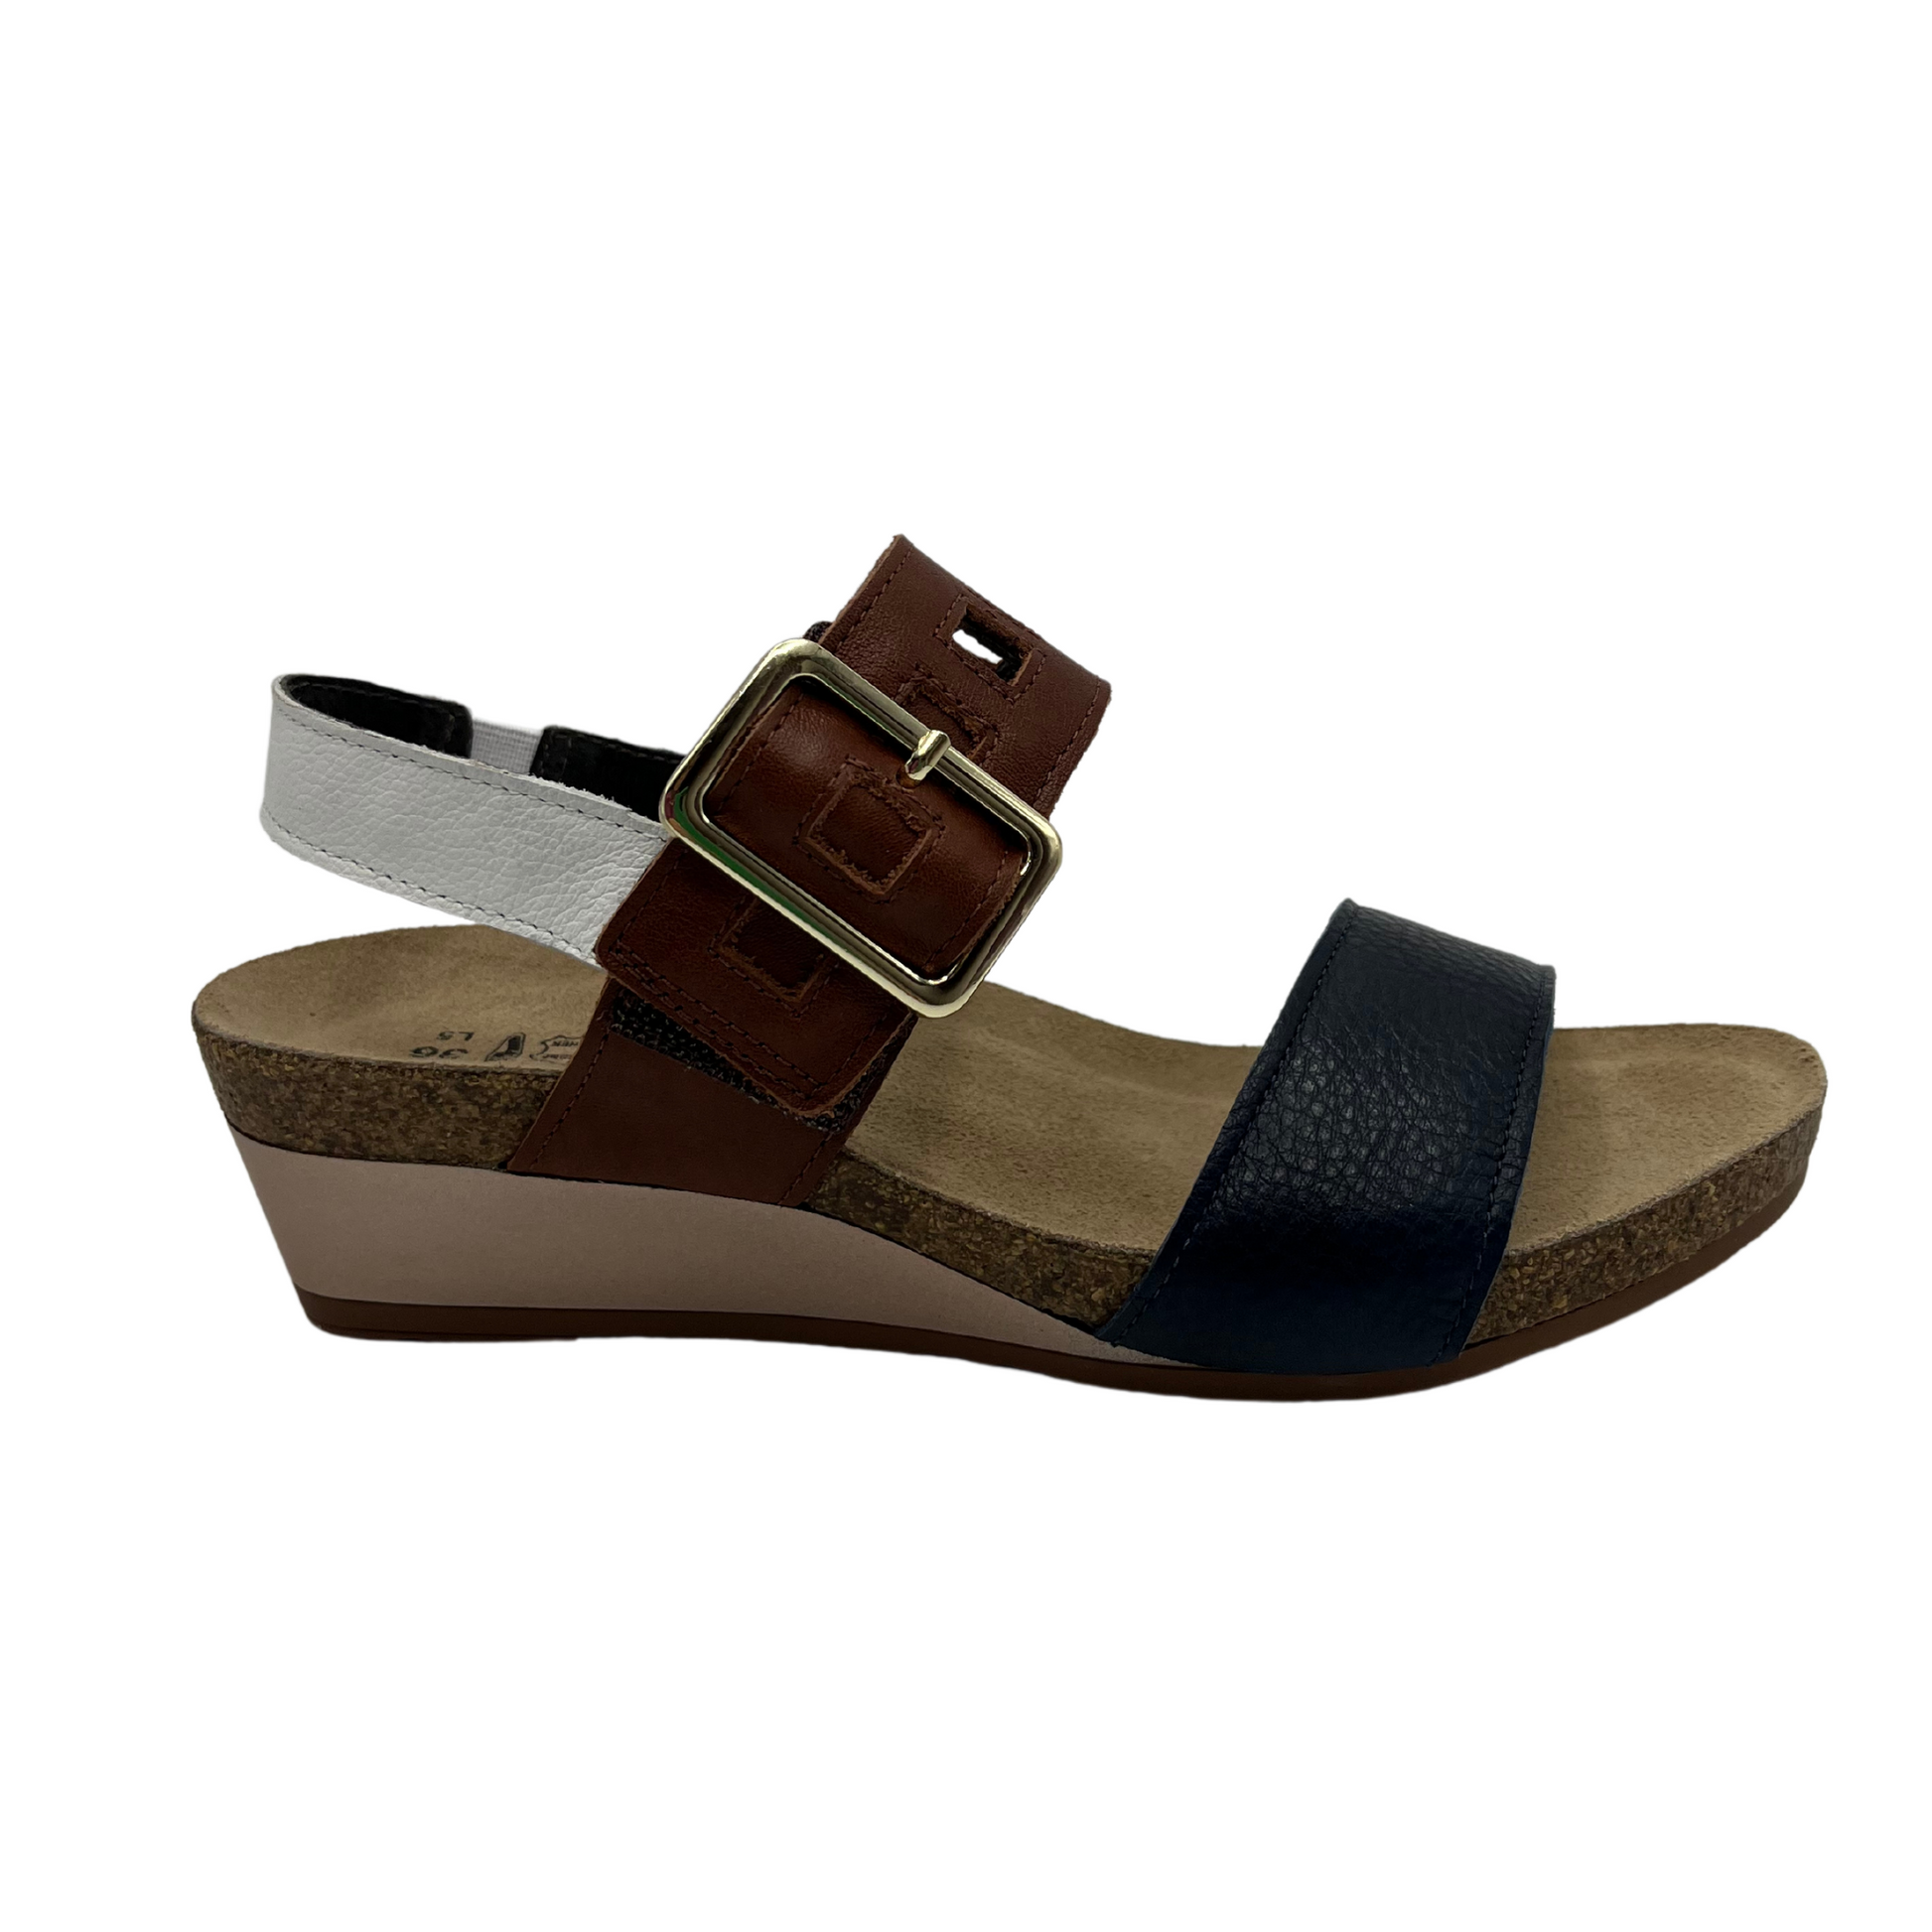 Right view of leather sandal with a large buckle strap with low wedge heel